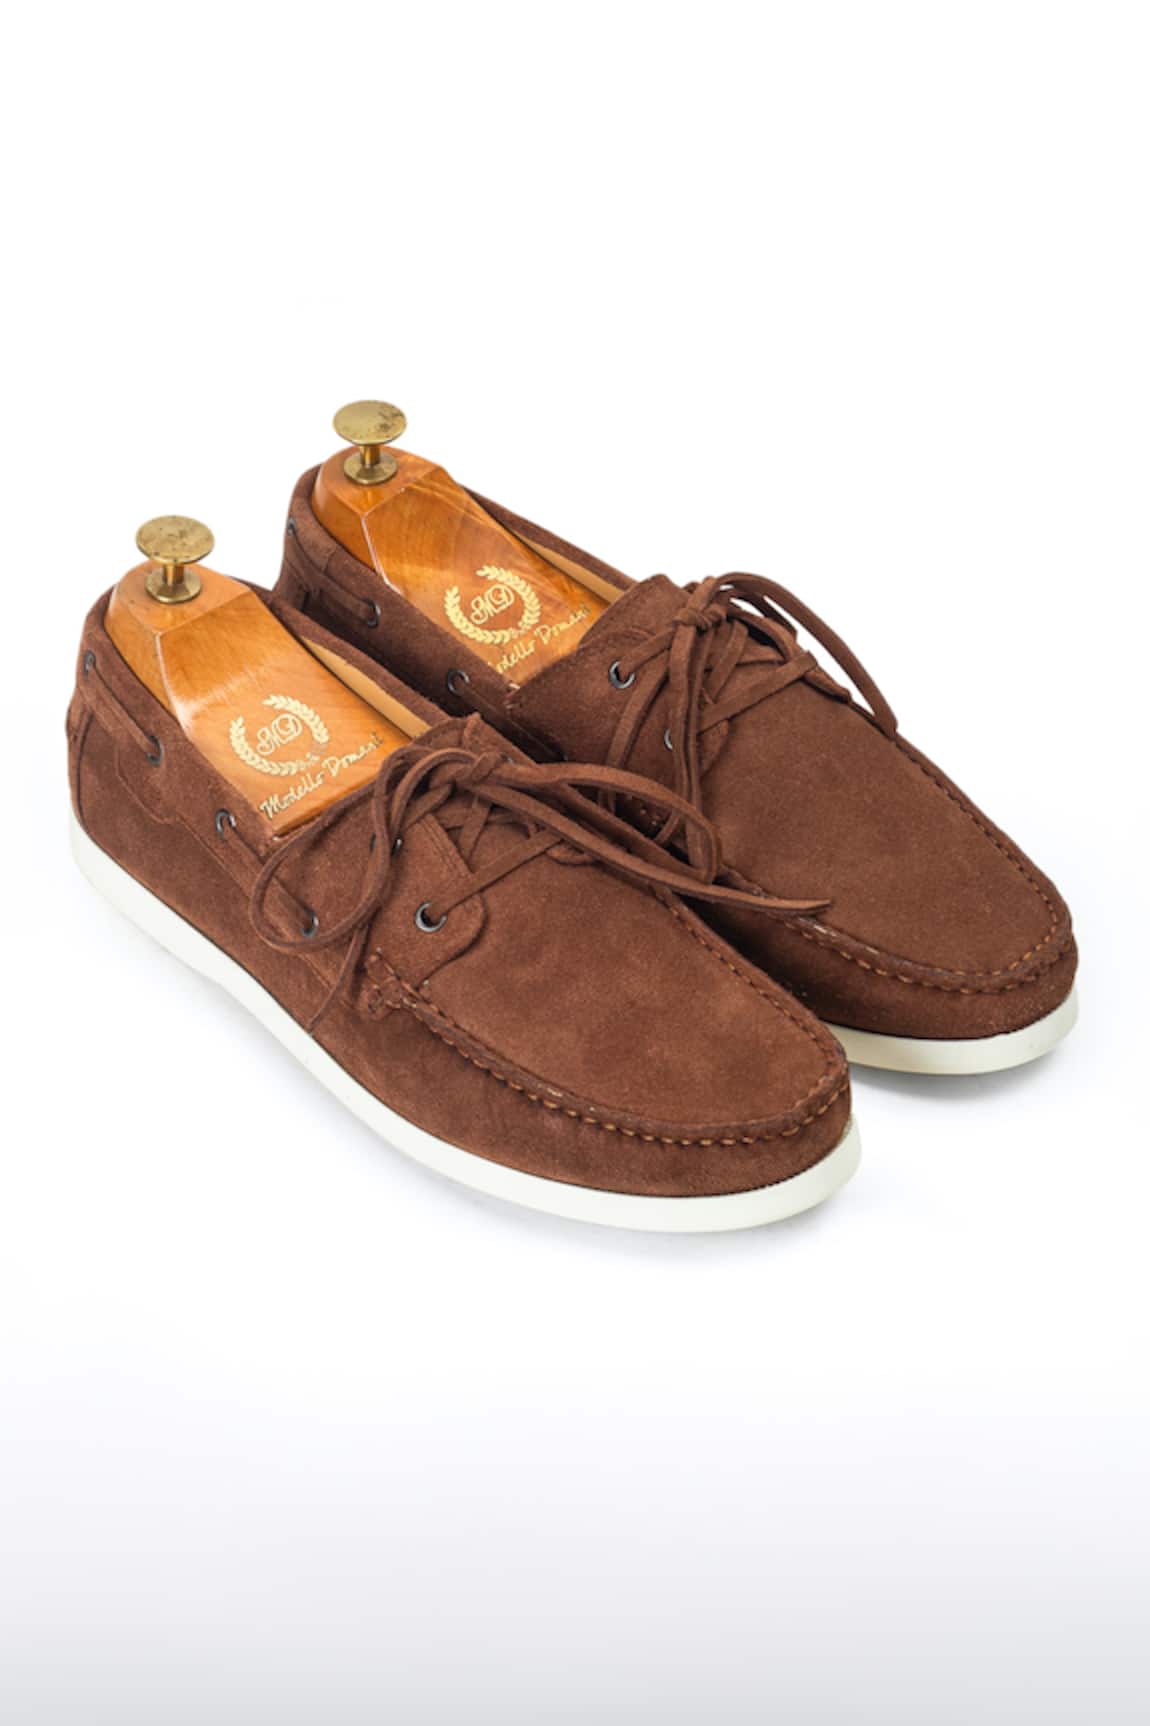 Domani Lucia Boat Leather & Suede Shoes